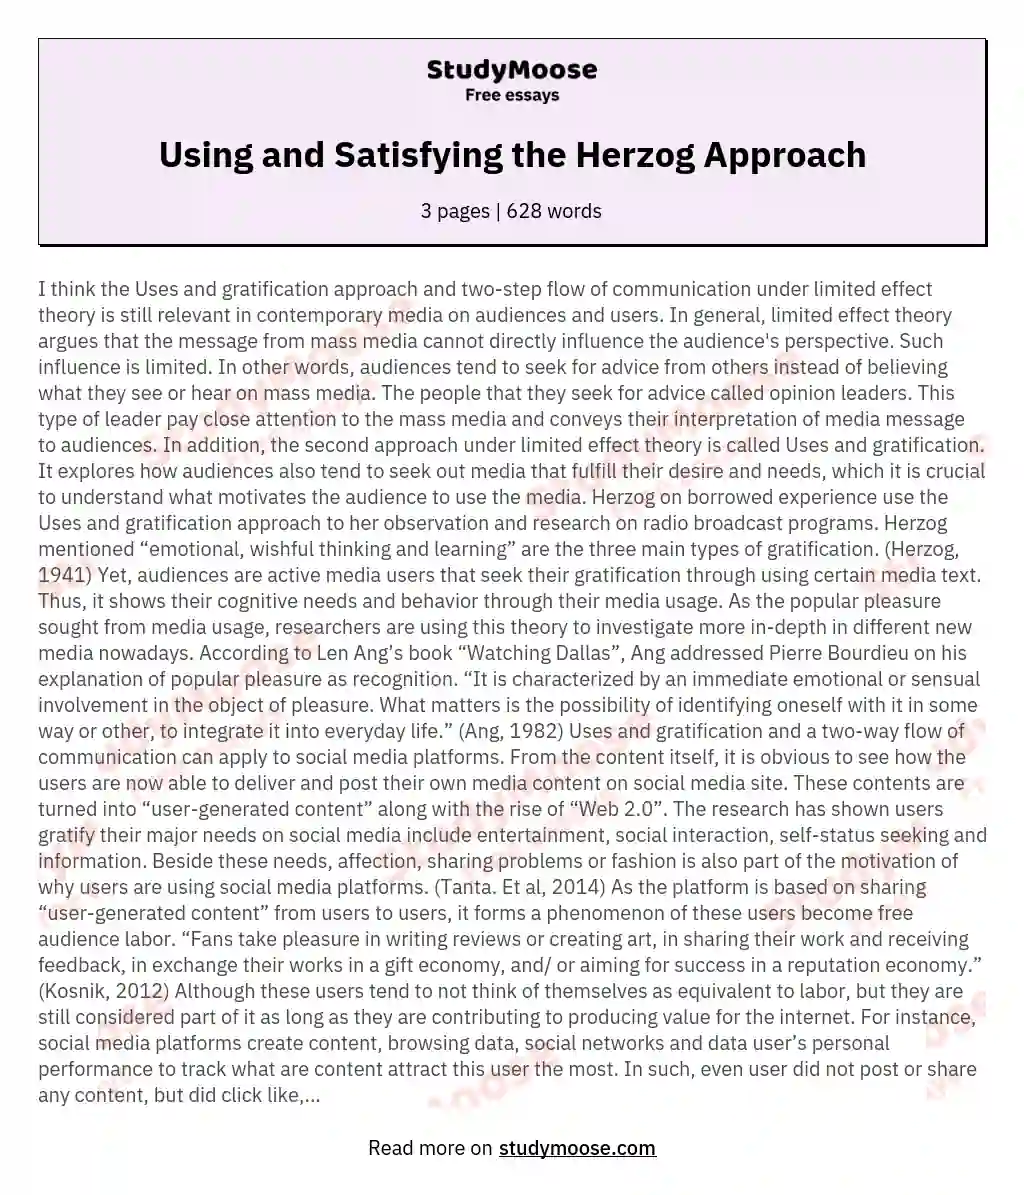 Using and Satisfying the Herzog Approach essay